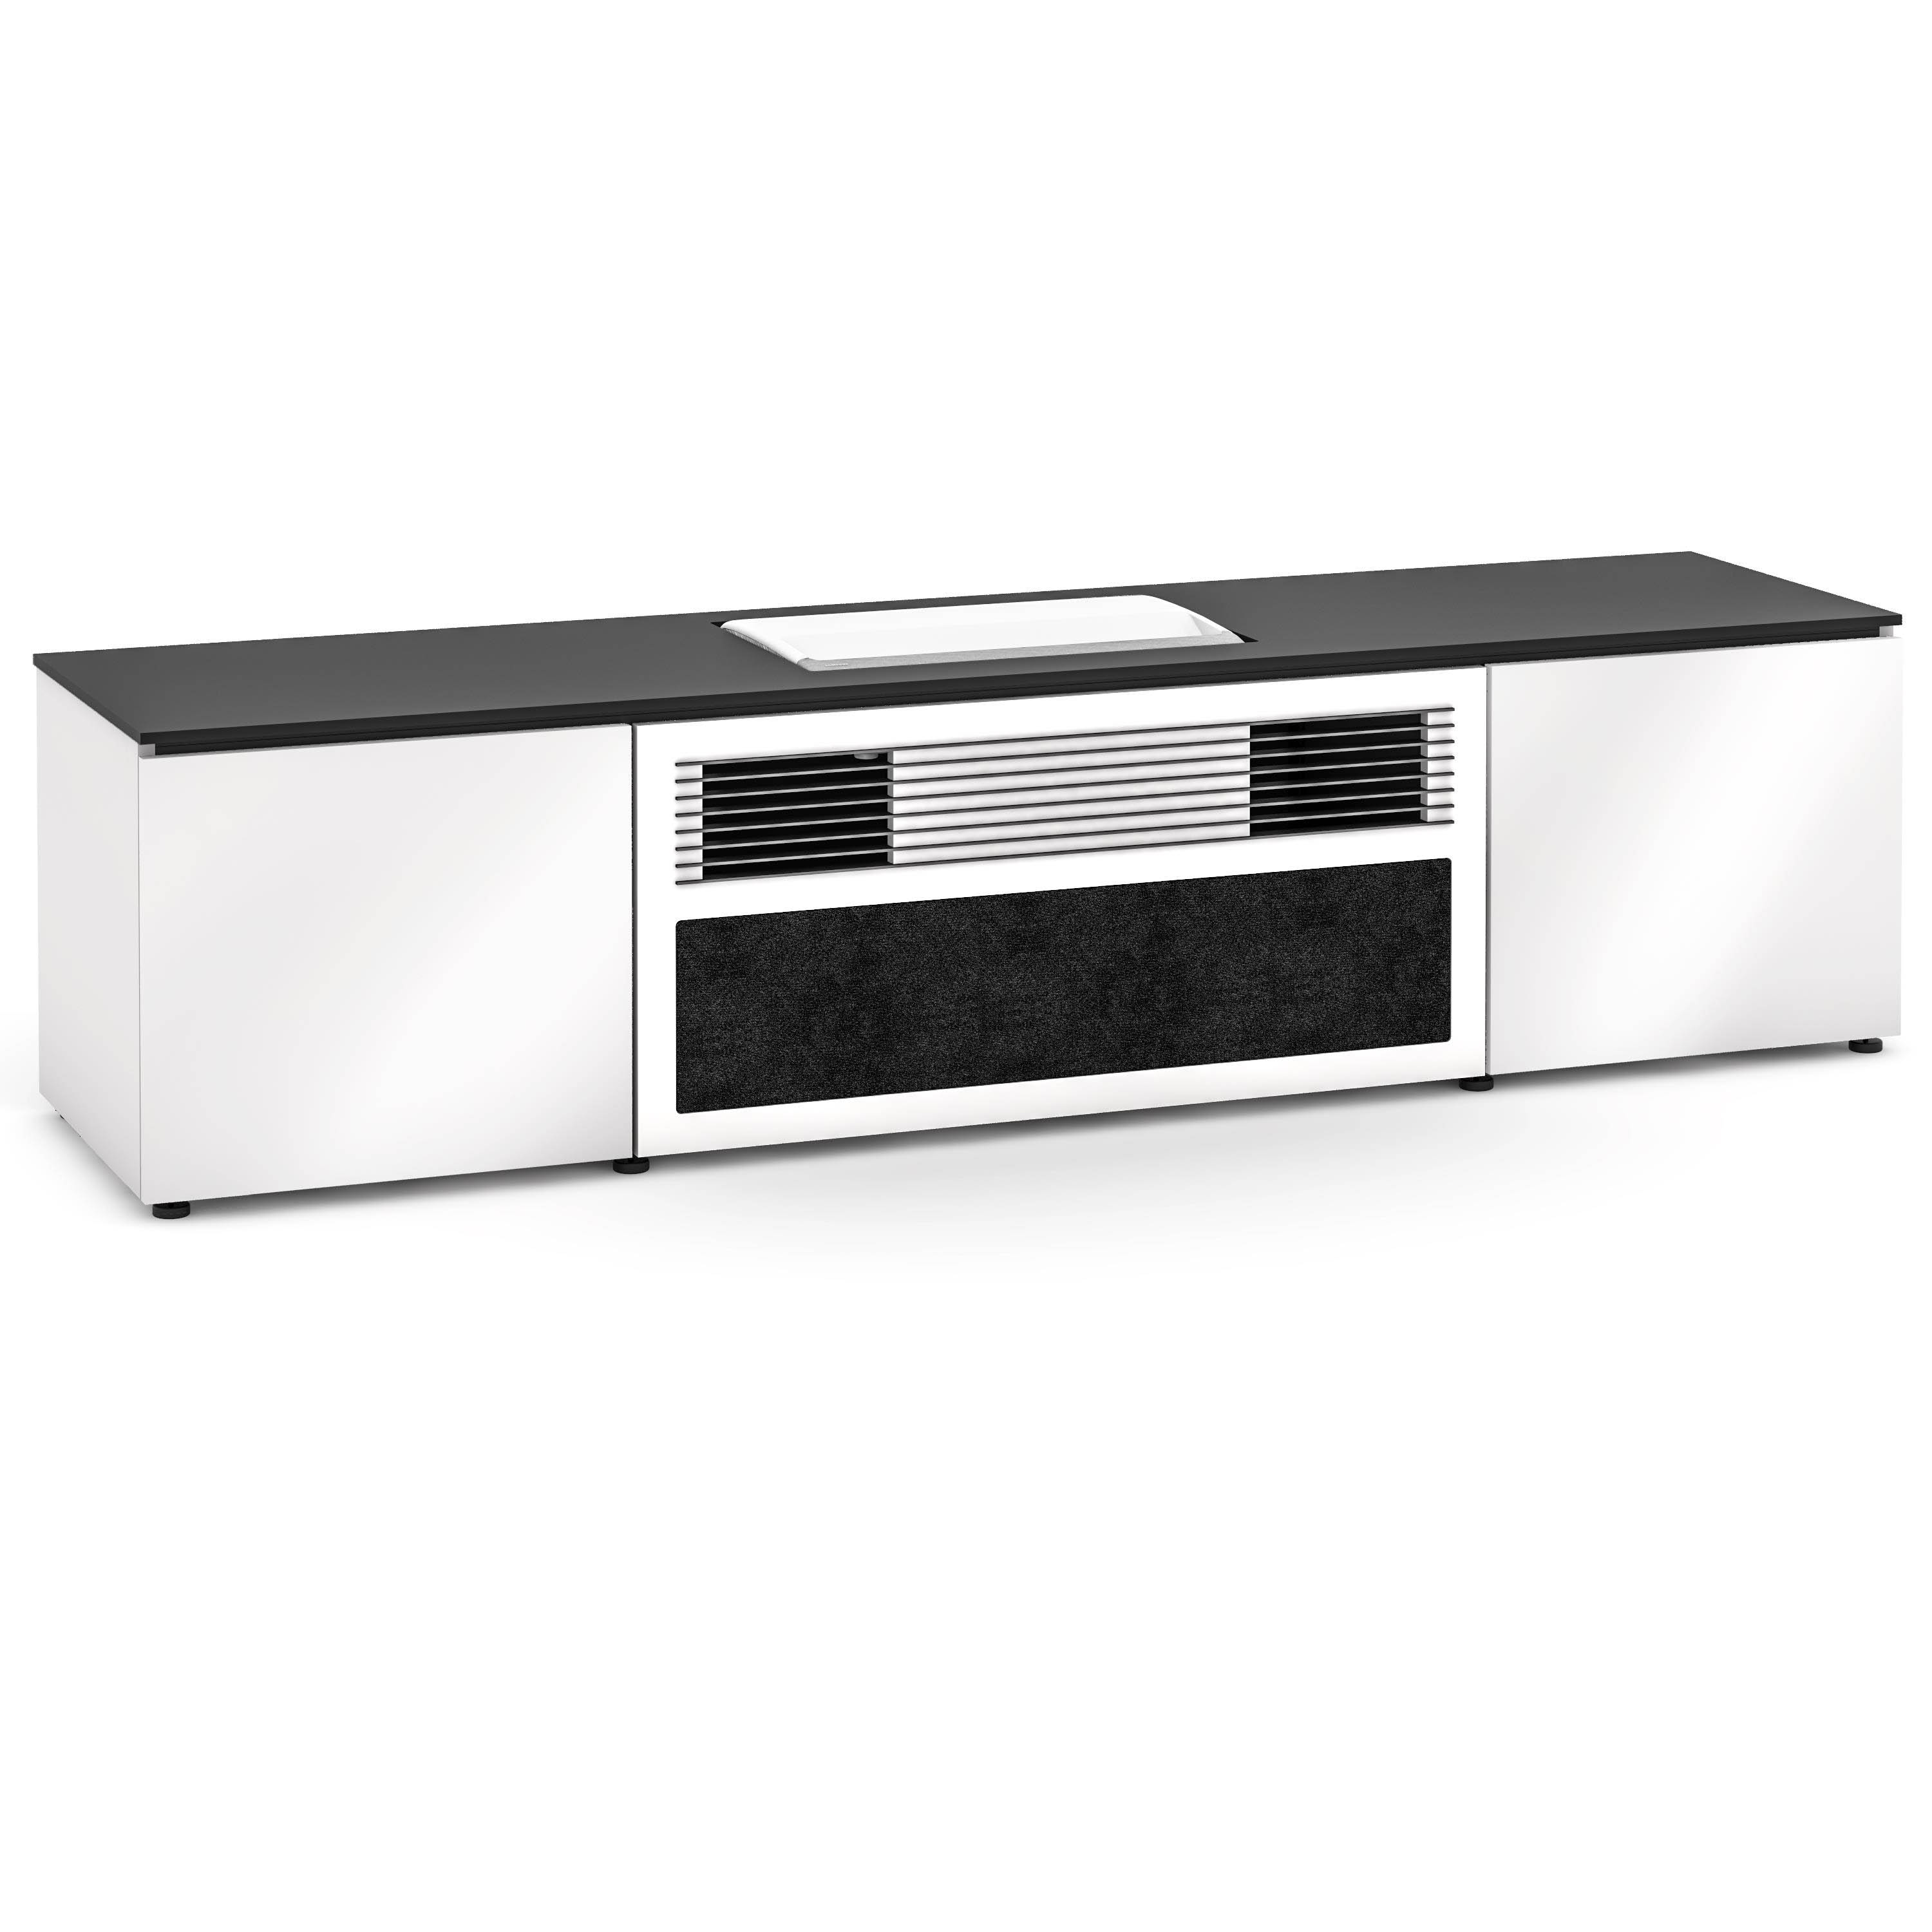 Salamander Designs Miami 245MM Cabinet for integrated Samsung LSP9T UST Projector - Gloss White, Black Top - X/SMG9/245MM/GW